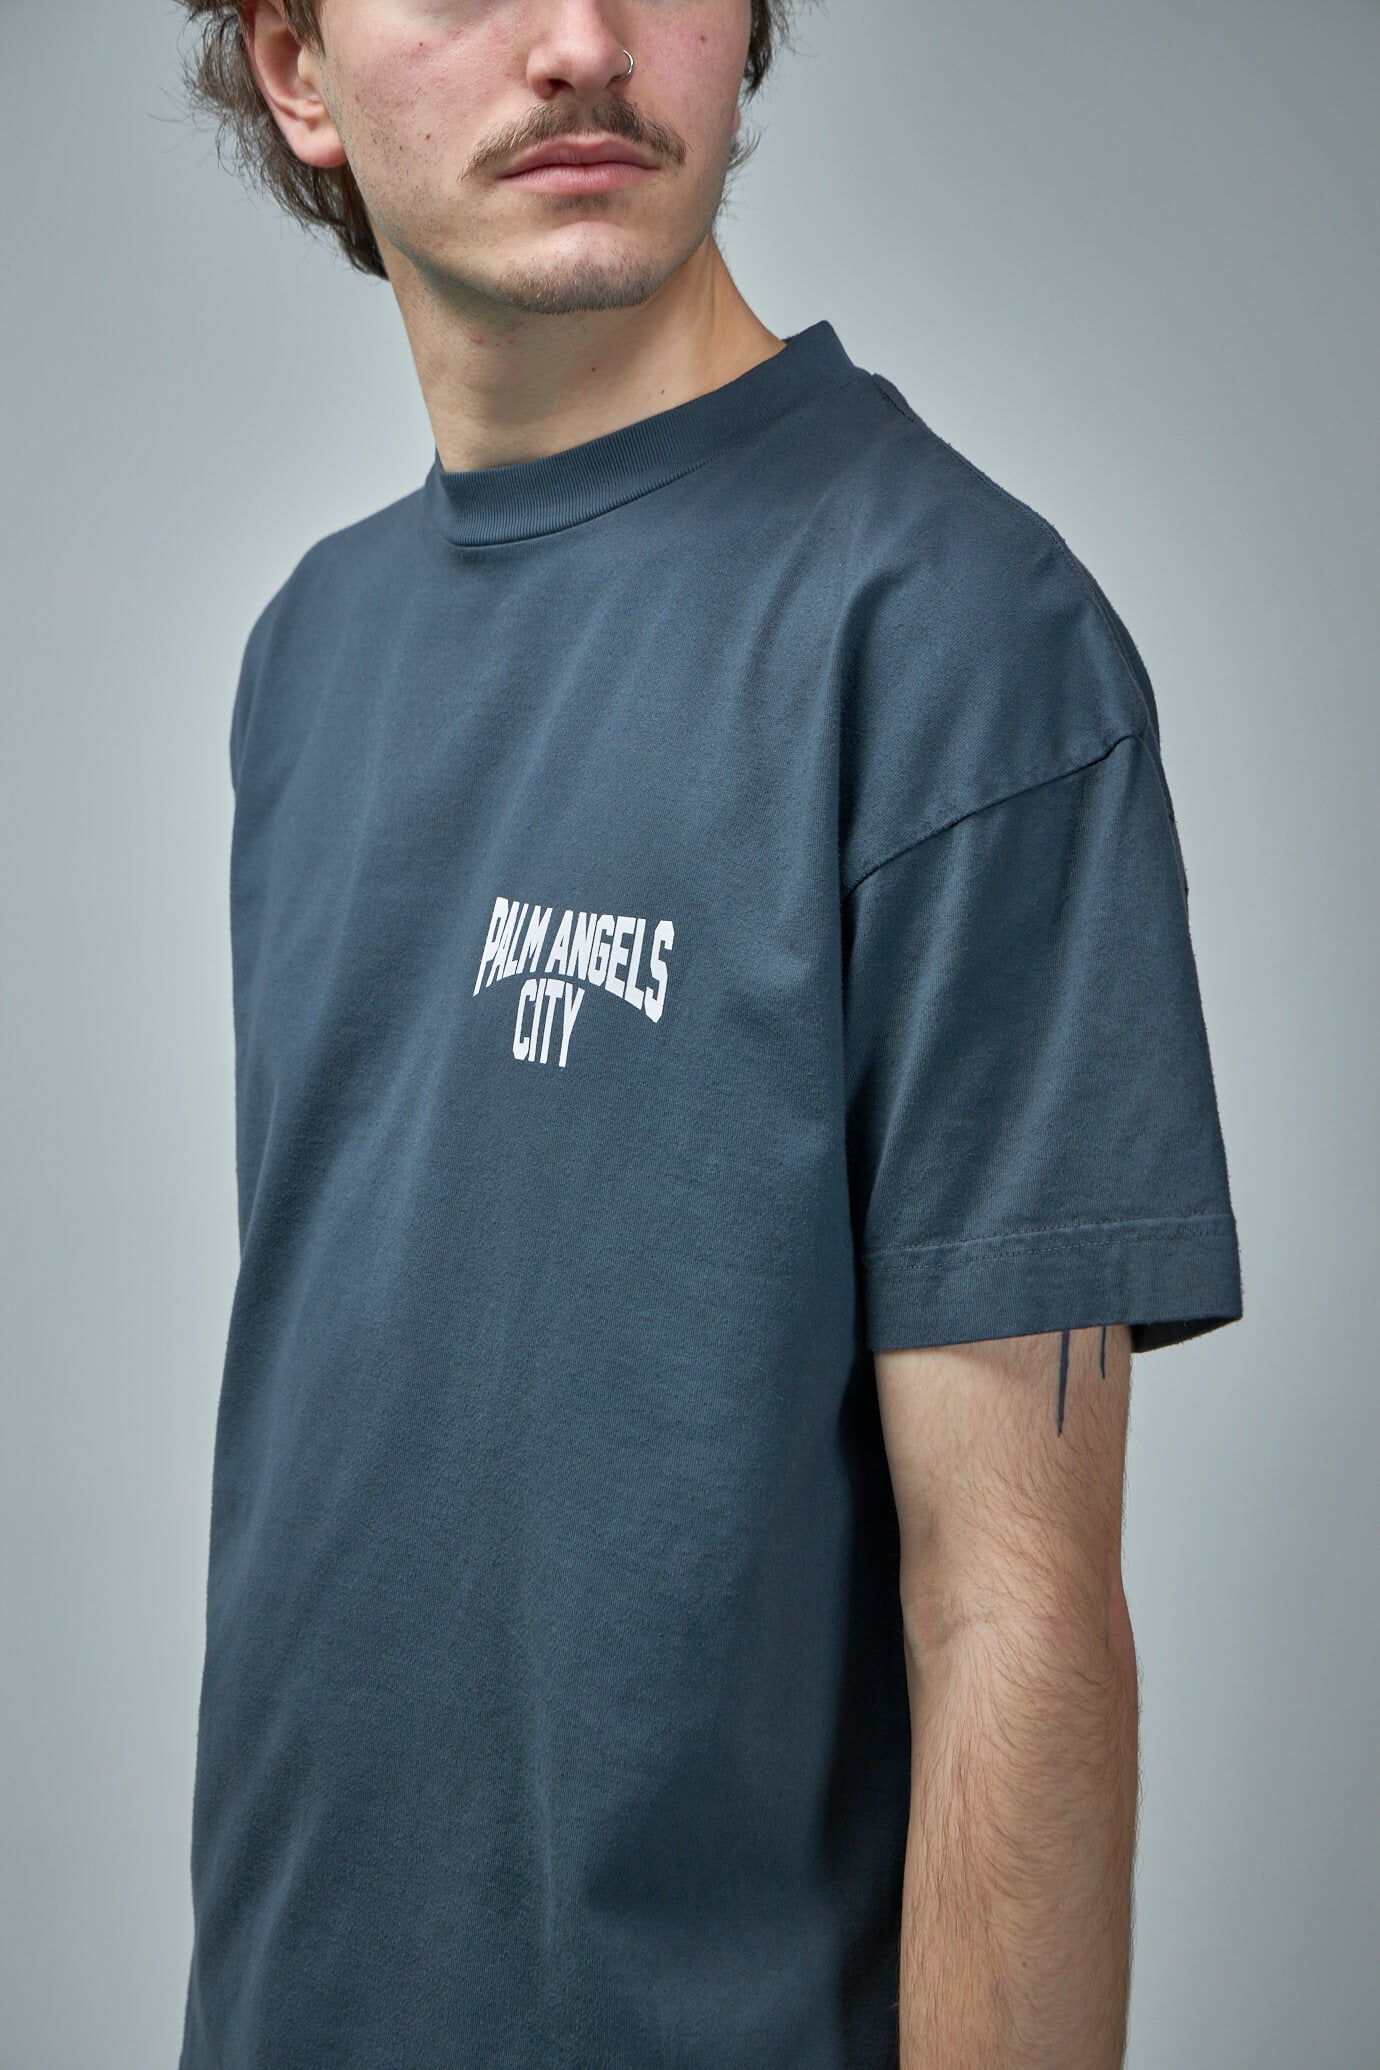 Pa City Washed Tee